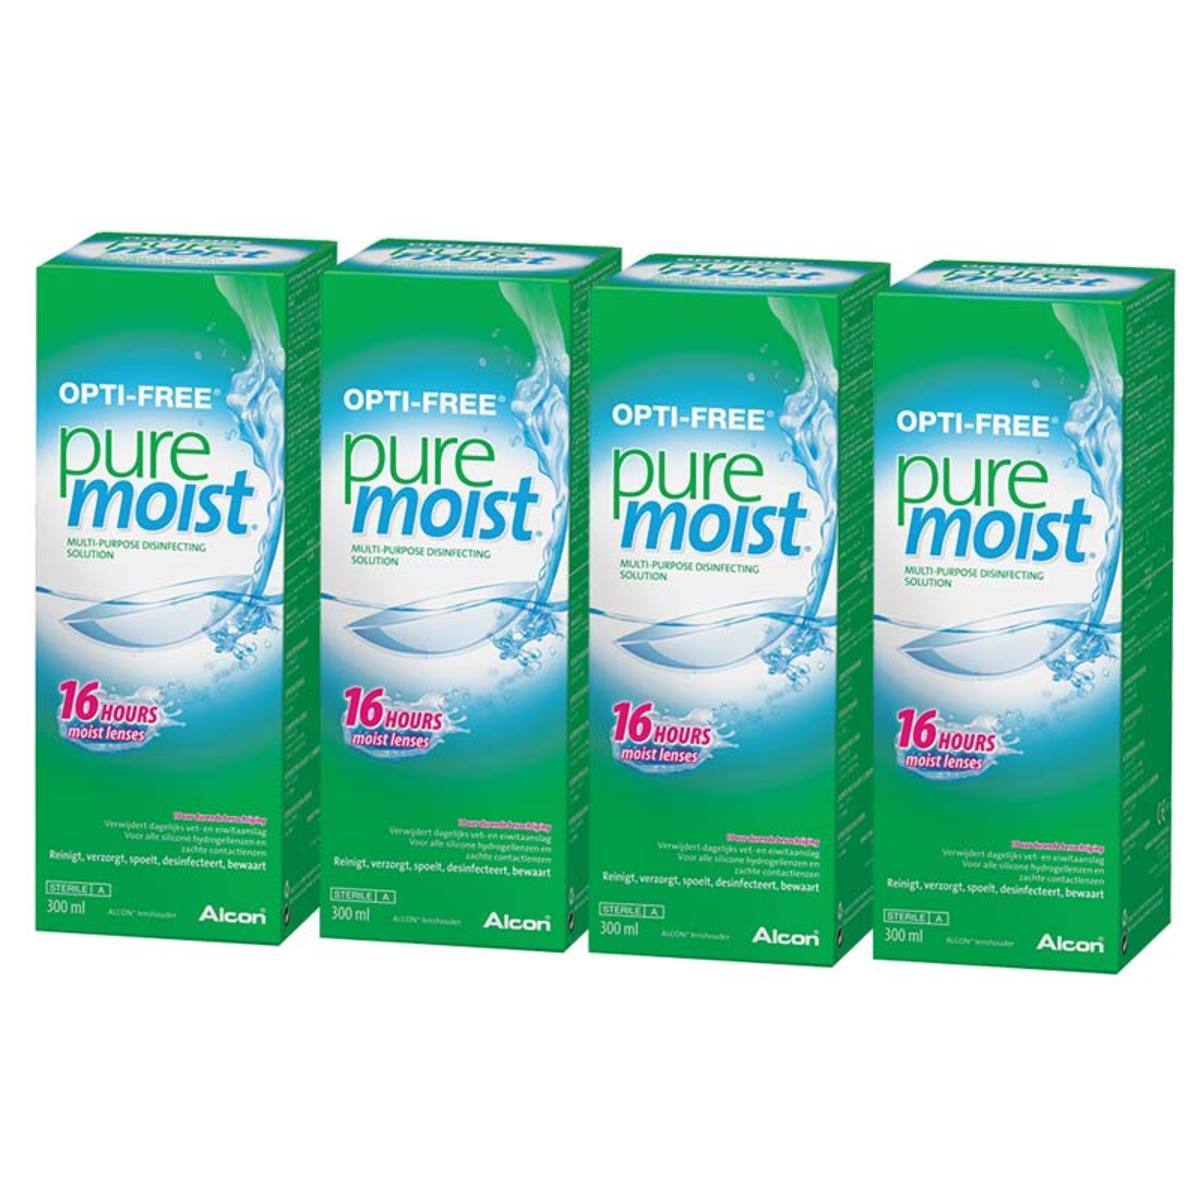 Opti-Free Pure Moist Multi-Purpose Disinfecting Solution, 4 x 300ml (6 Months Supply)